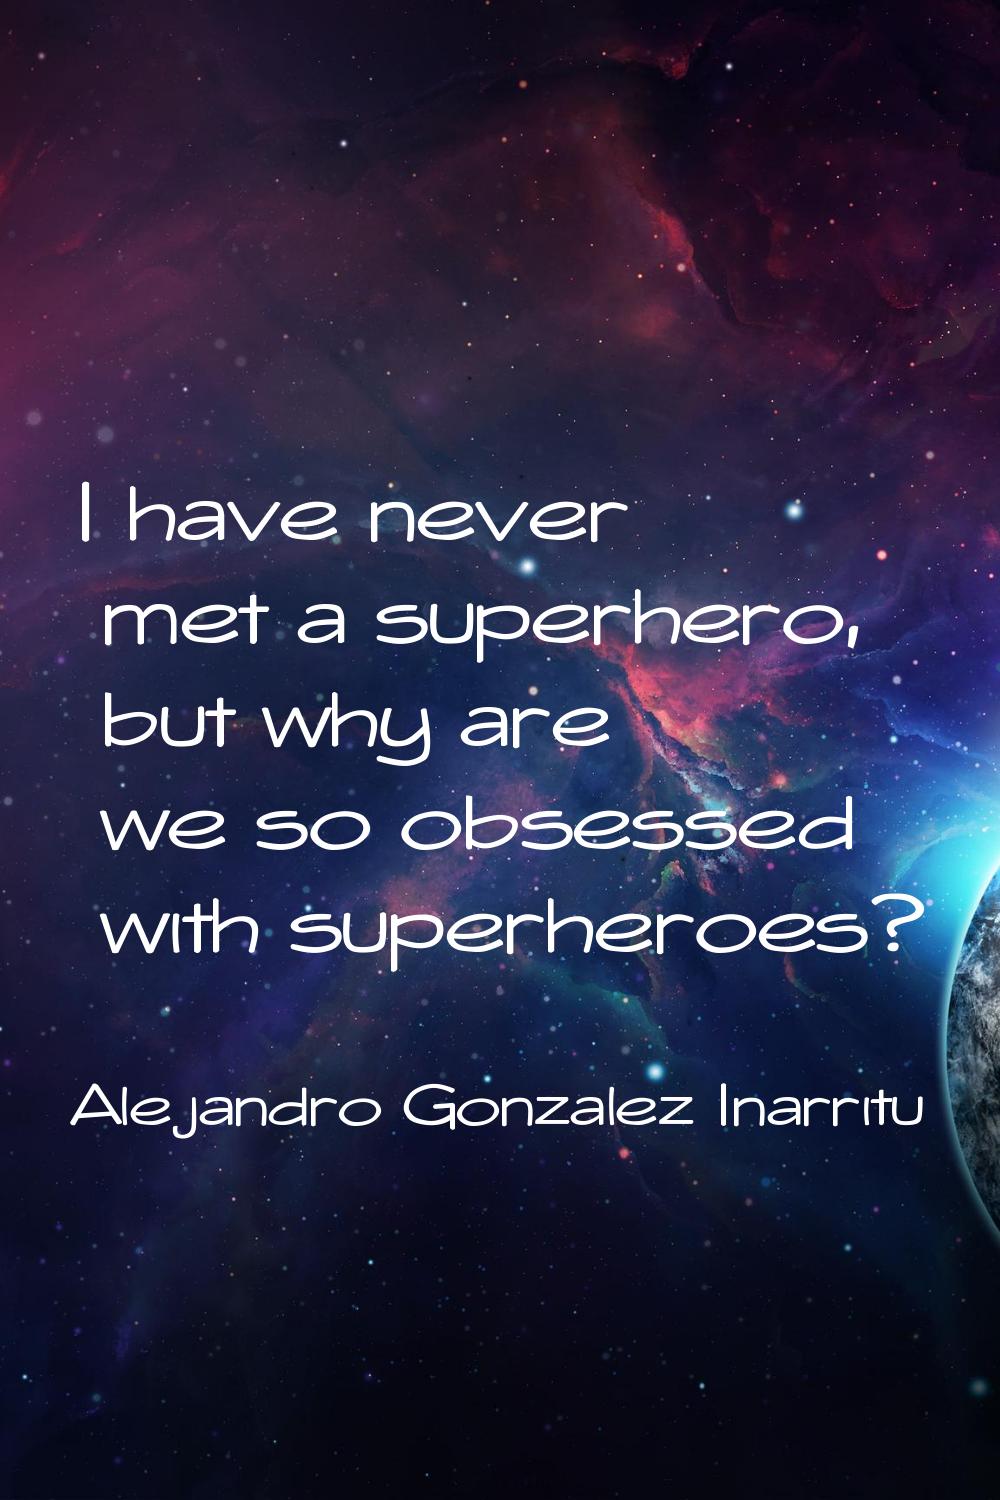 I have never met a superhero, but why are we so obsessed with superheroes?